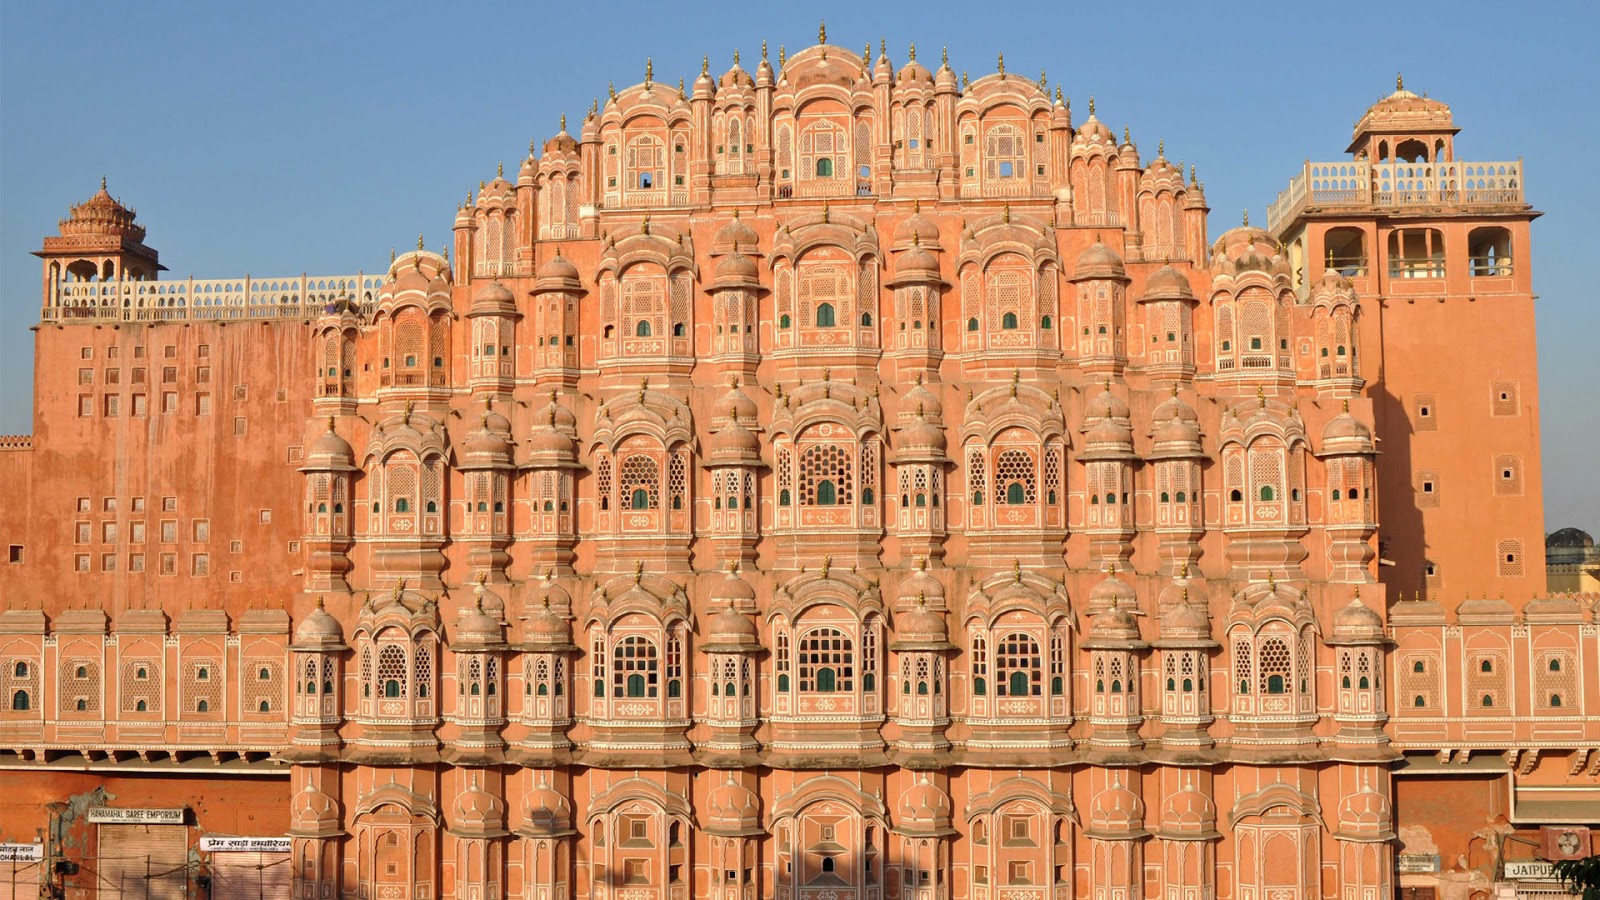 In Jaipur for a day? Here’s what you should do in India’s Pink City